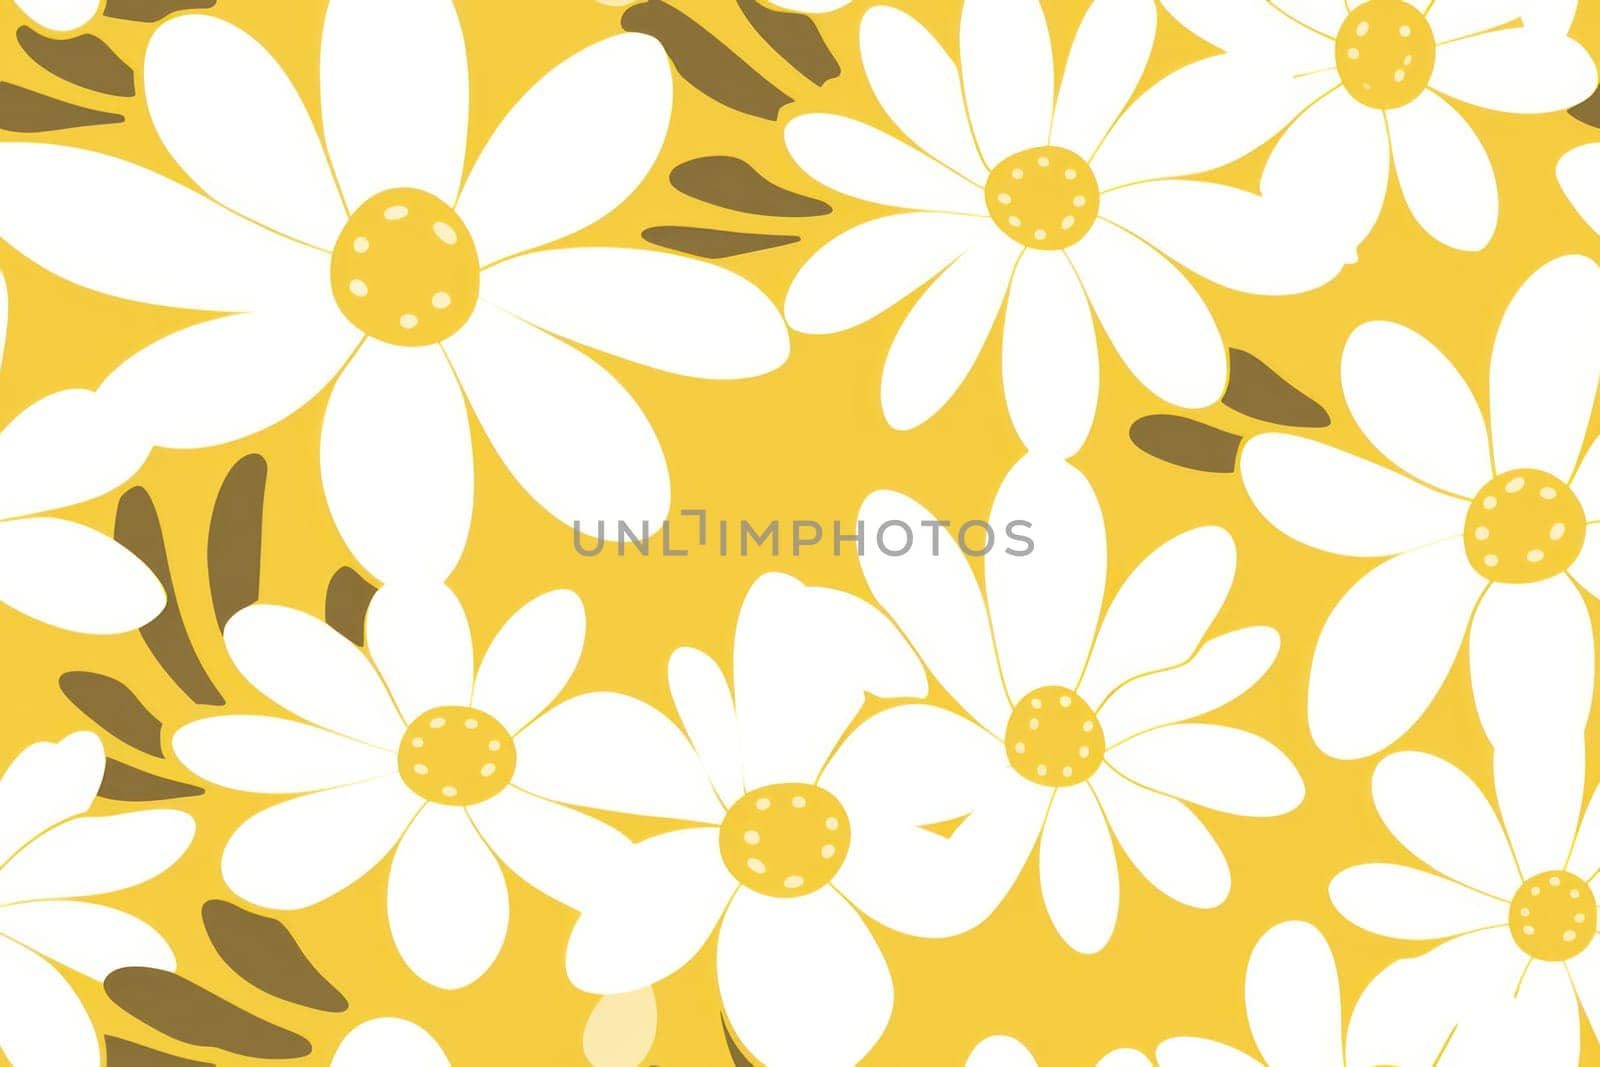 Floral Summer Bliss: A Seamless Pattern of Nature's Blossoming Daisies in White and Yellow, a Decorative Design Illustration on a Textured Wallpaper Background. by Vichizh